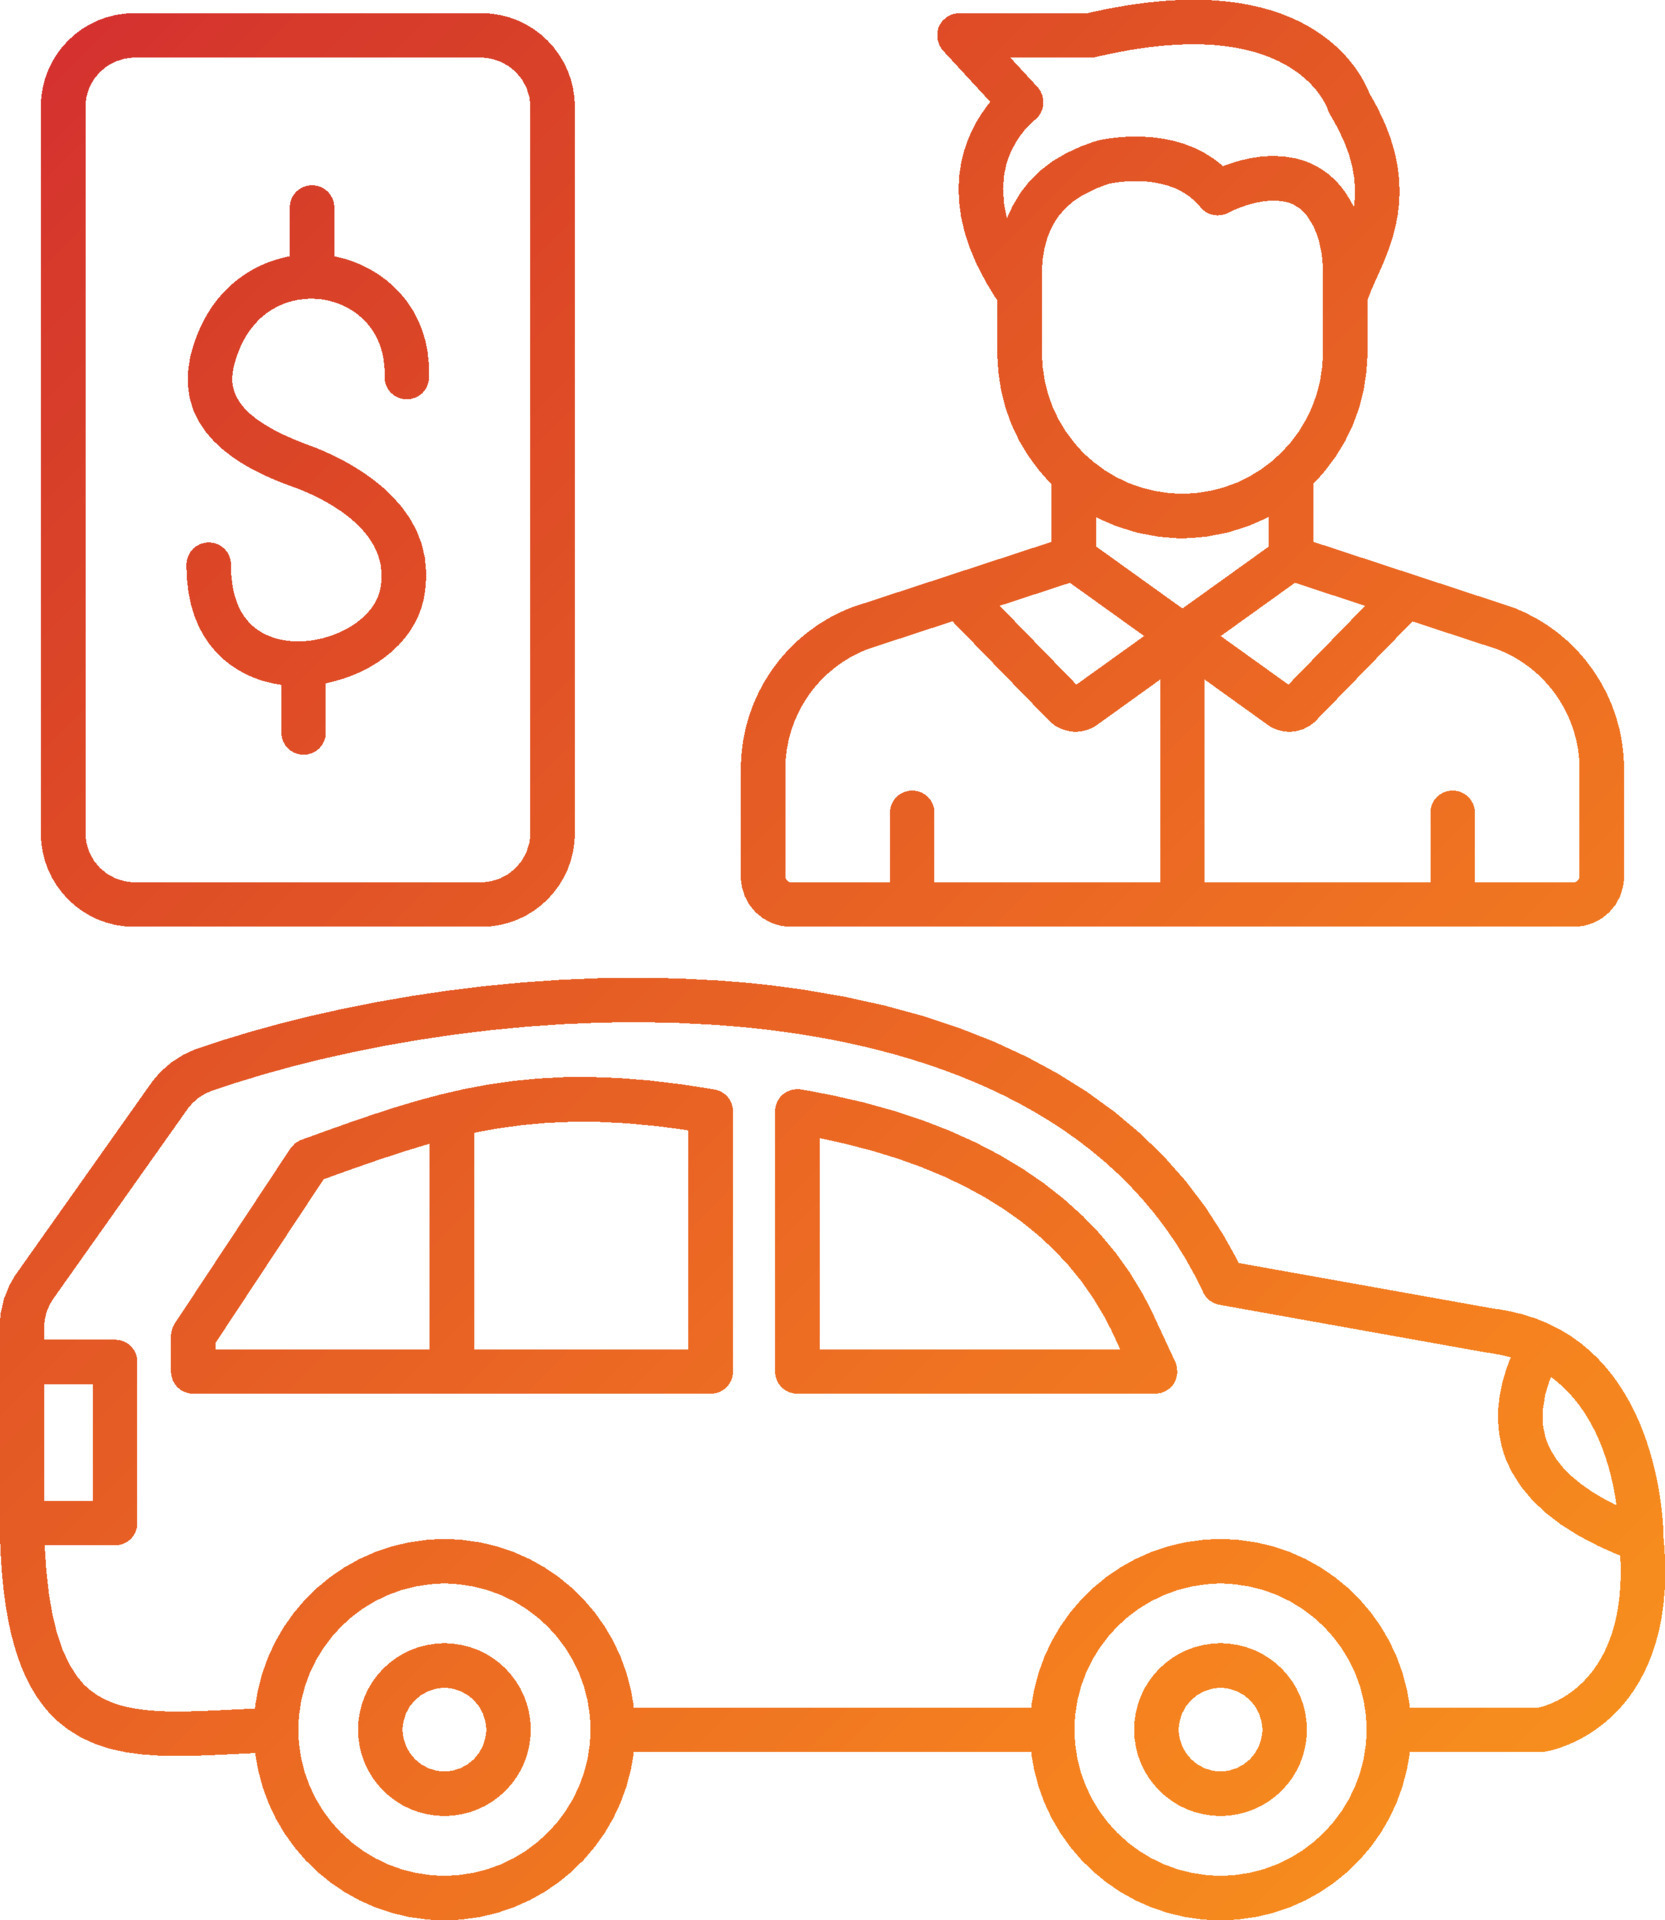 dealer-incentives-icon-style-9240043-vector-art-at-vecteezy